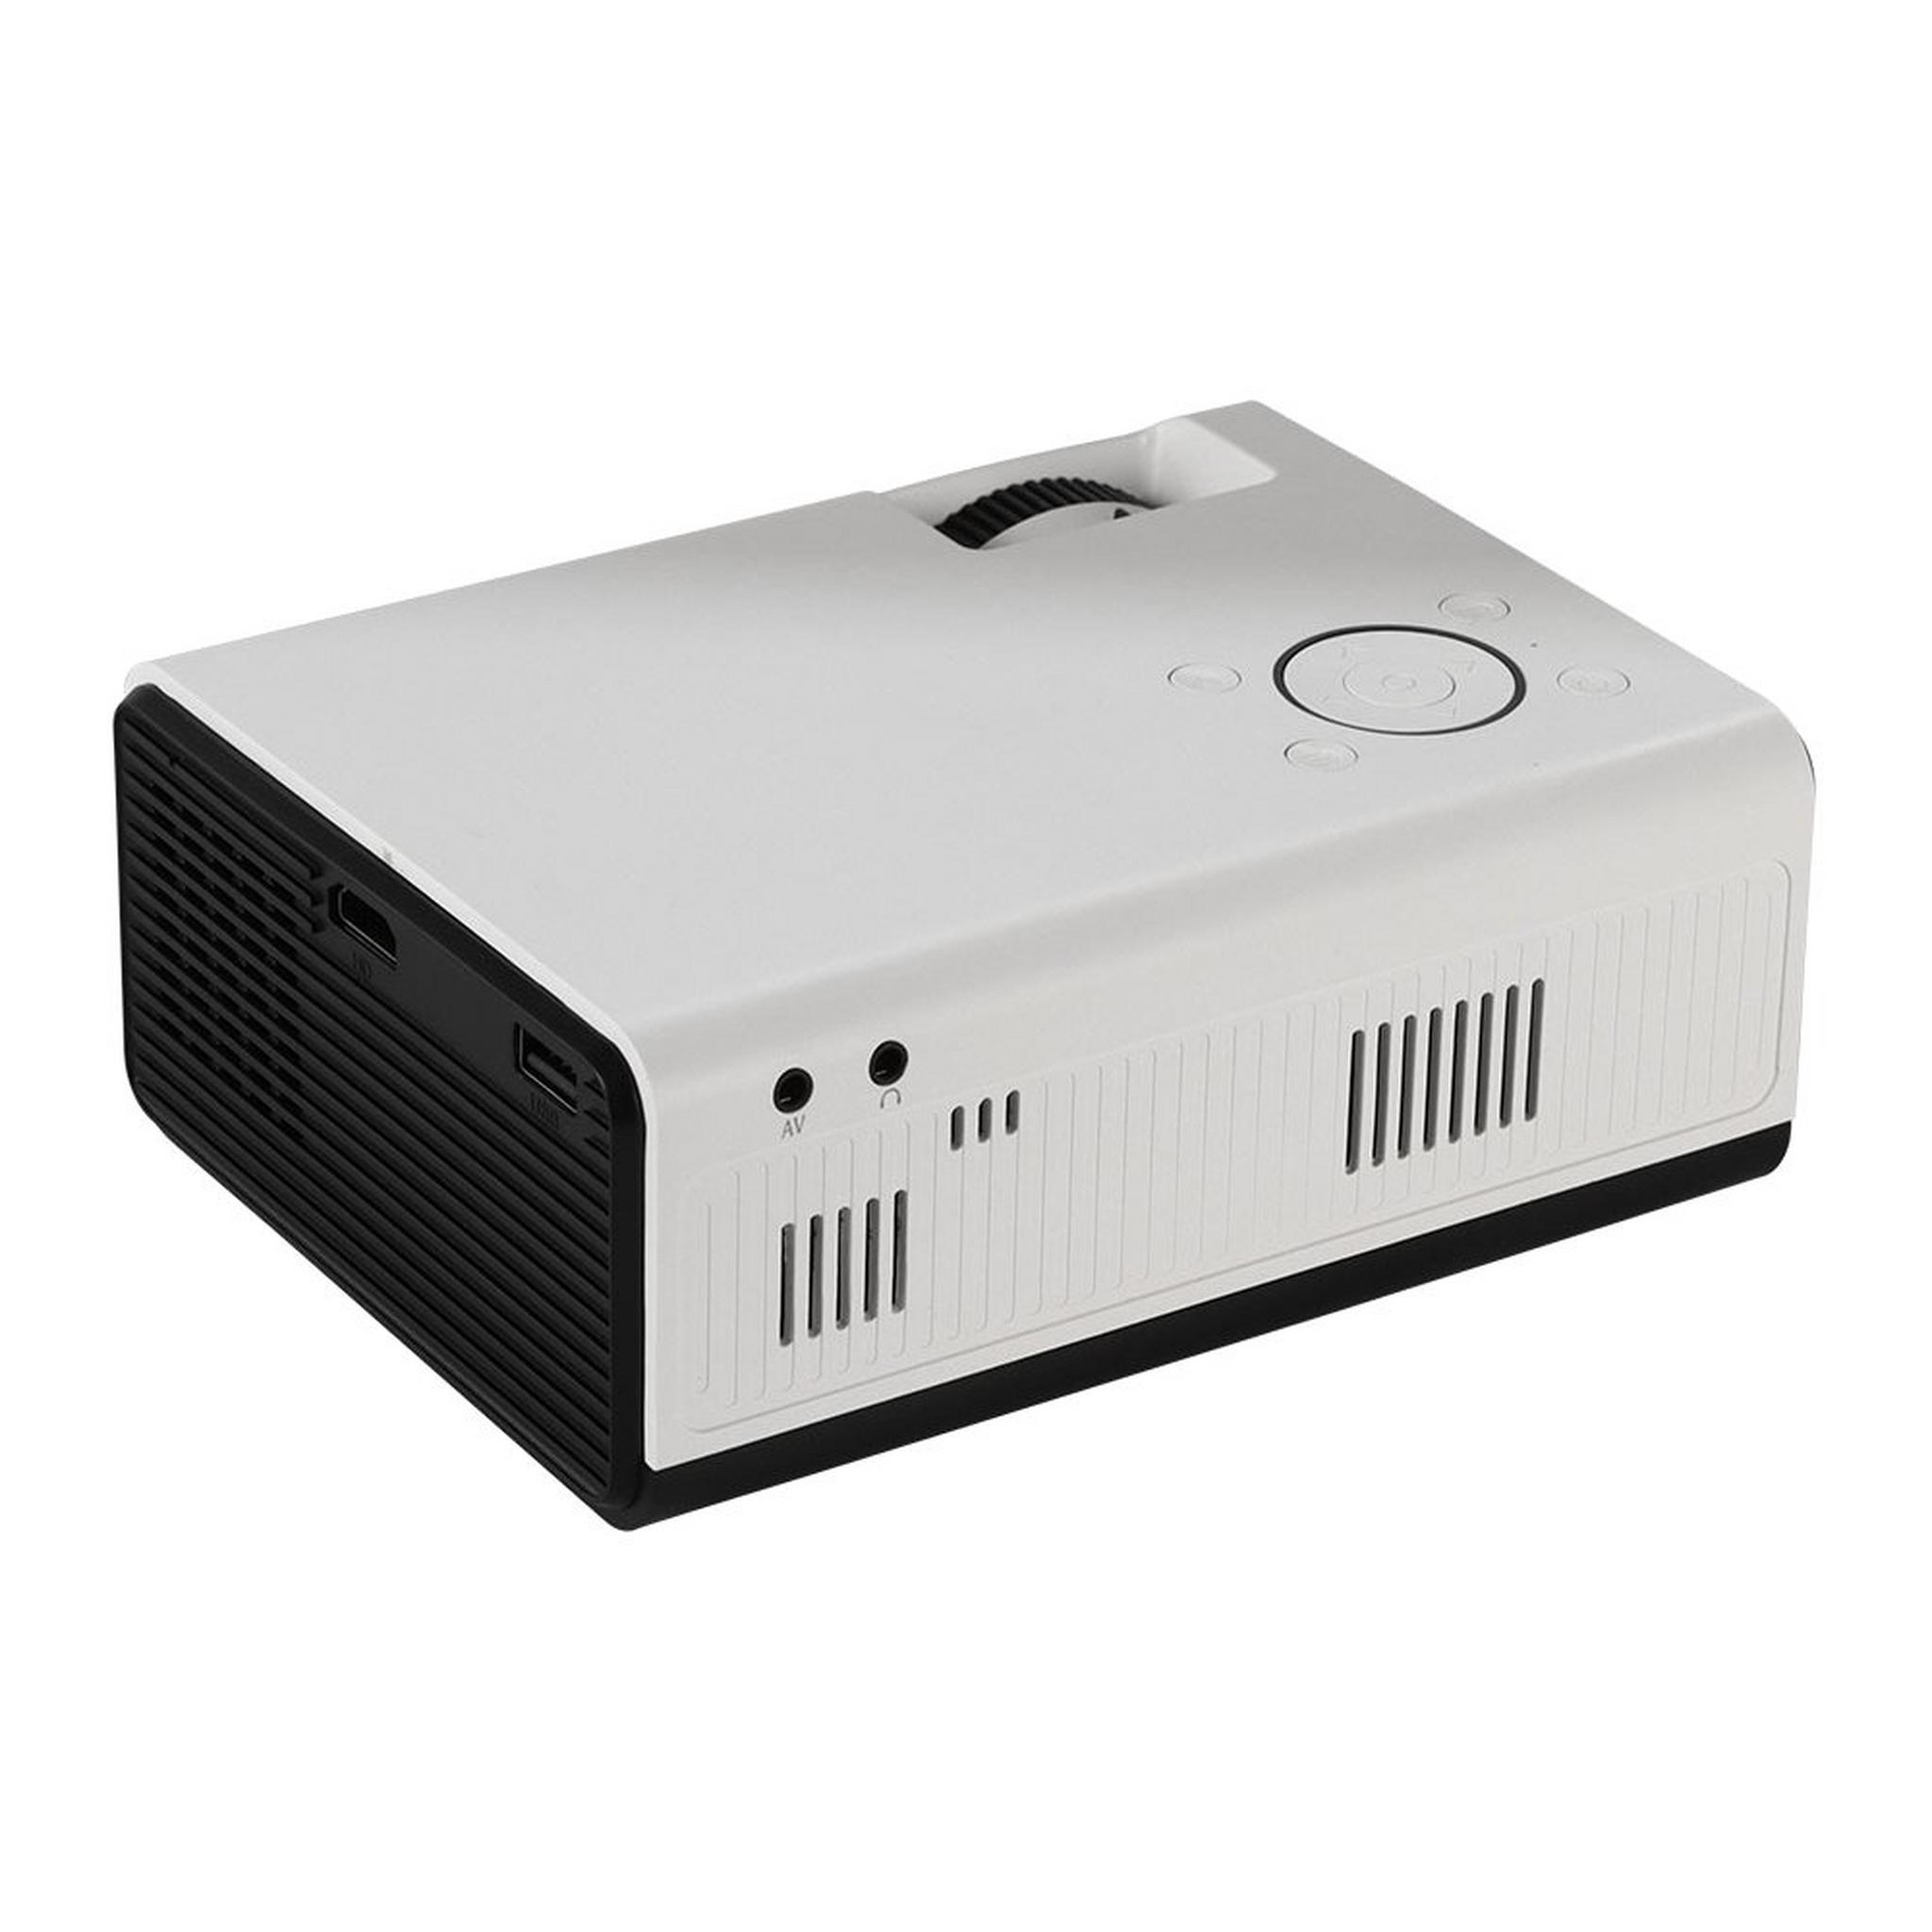 EQ LCD 720 Pixel Home Projector, T01-A - White